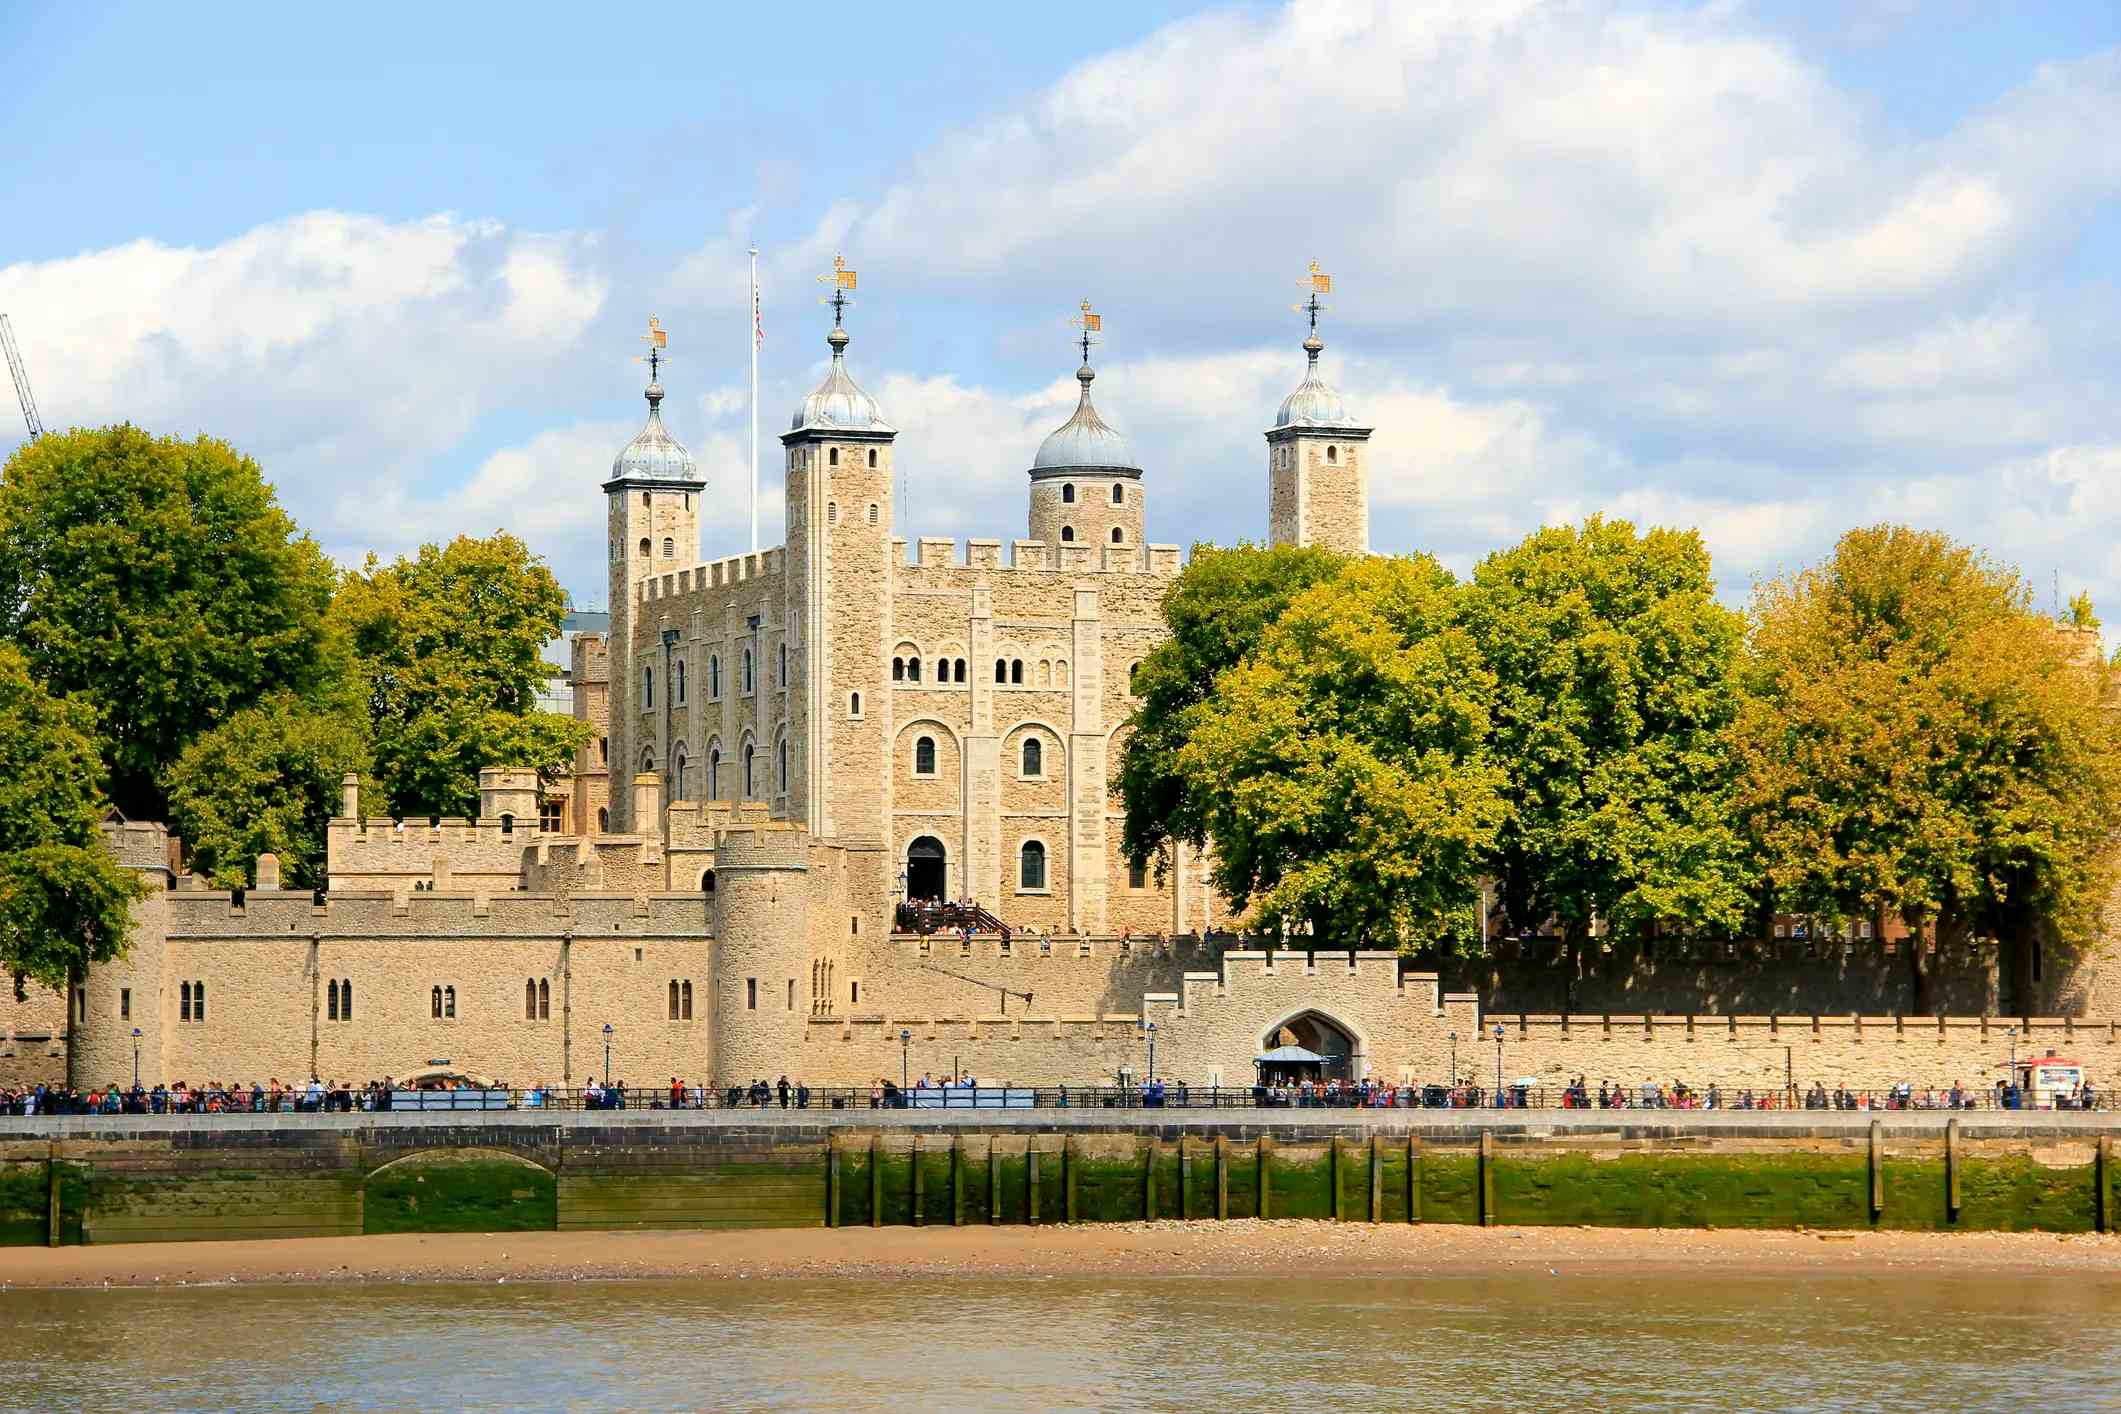 Tower of London image